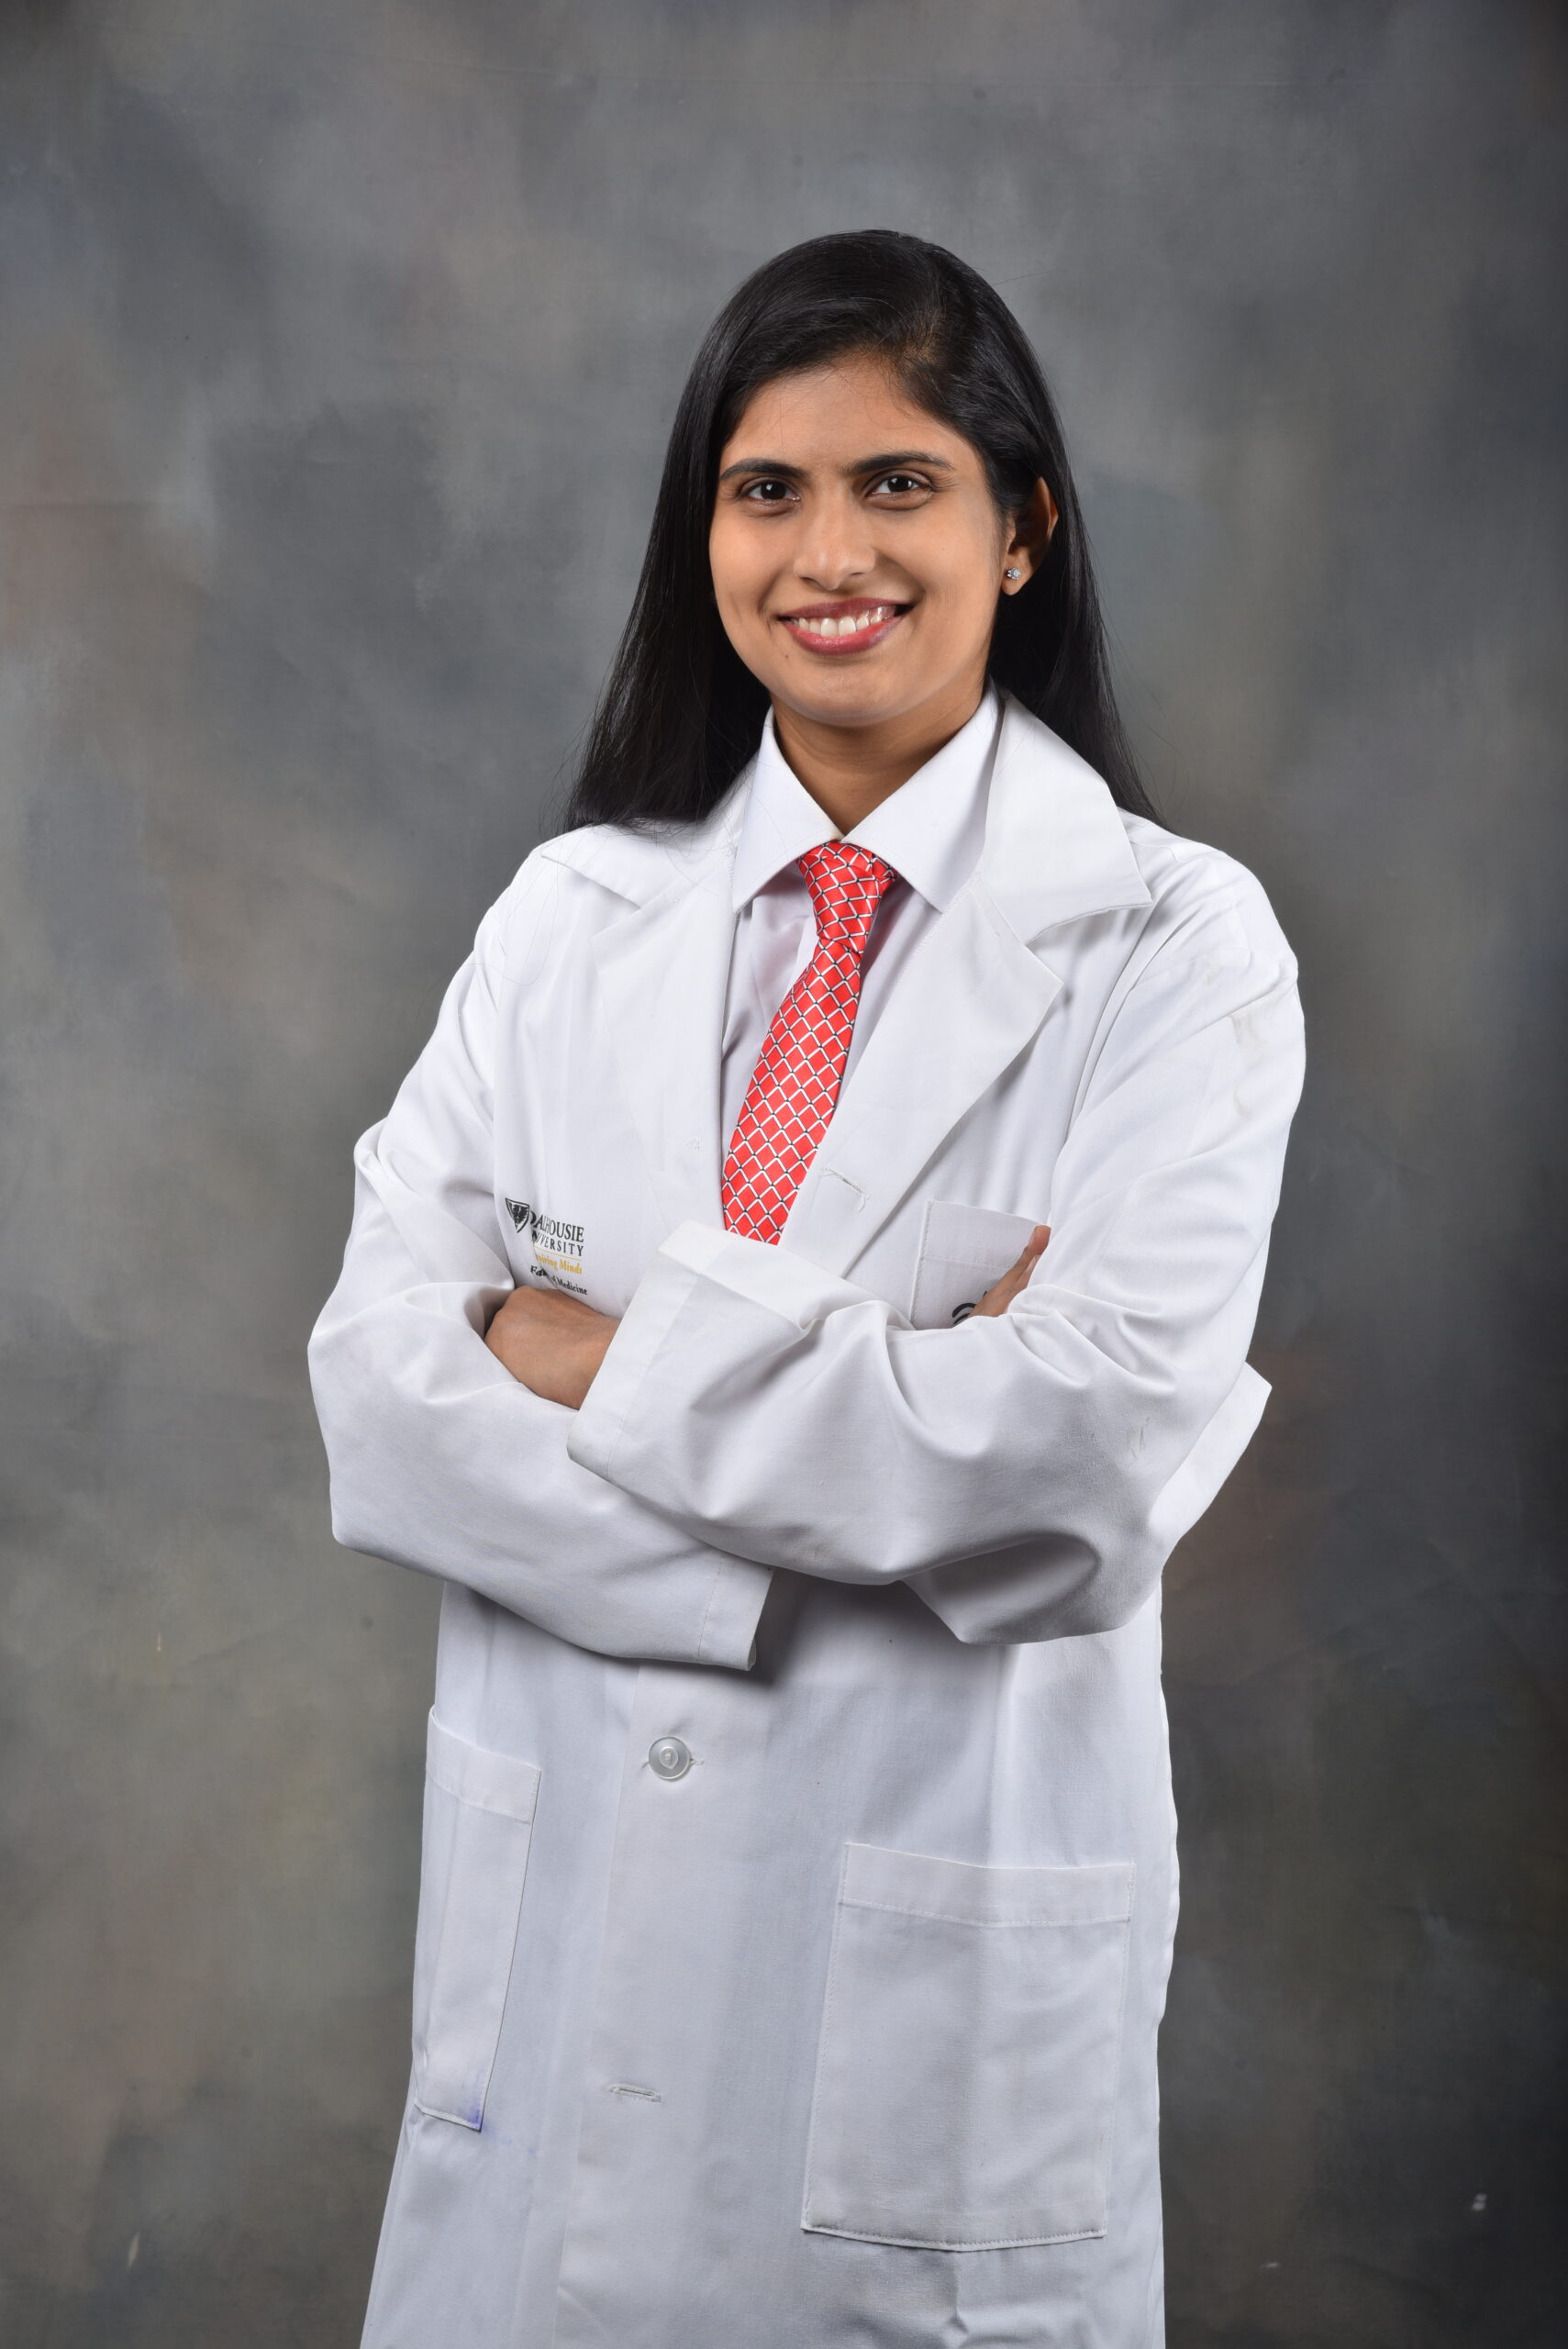 Dr. Snehal Dalal MBBS, DNB - Orthopedics/Orthopedic Surgery Spine Surgeon (Ortho), Spine And Pain Specialist, Joint Replacement Surgeon